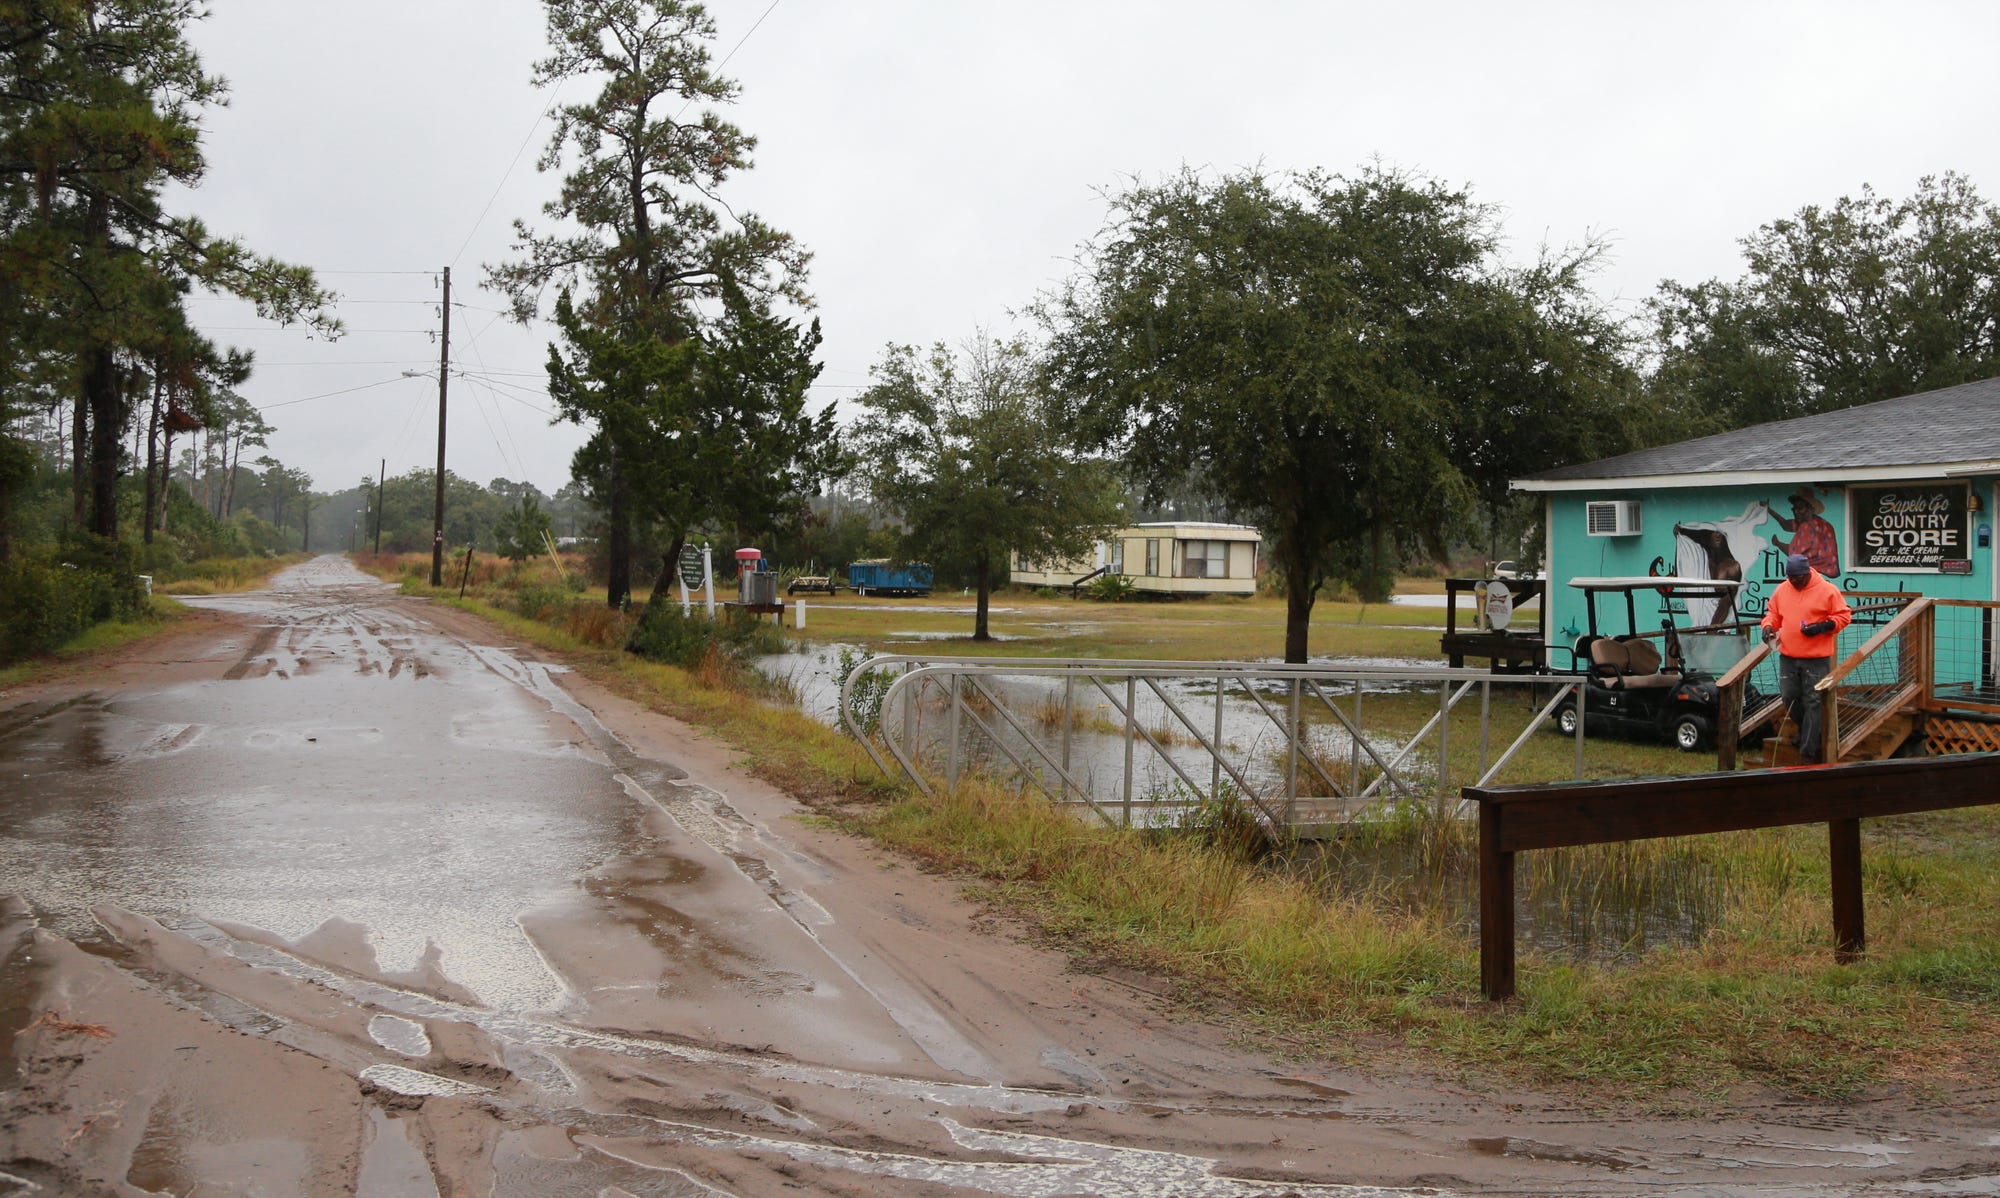 The water level rises out of the drainage ditch in front of Maurice Bailey's Sapelo Island store caused by a combination of rain and salt water being pushed inland from the King tides.